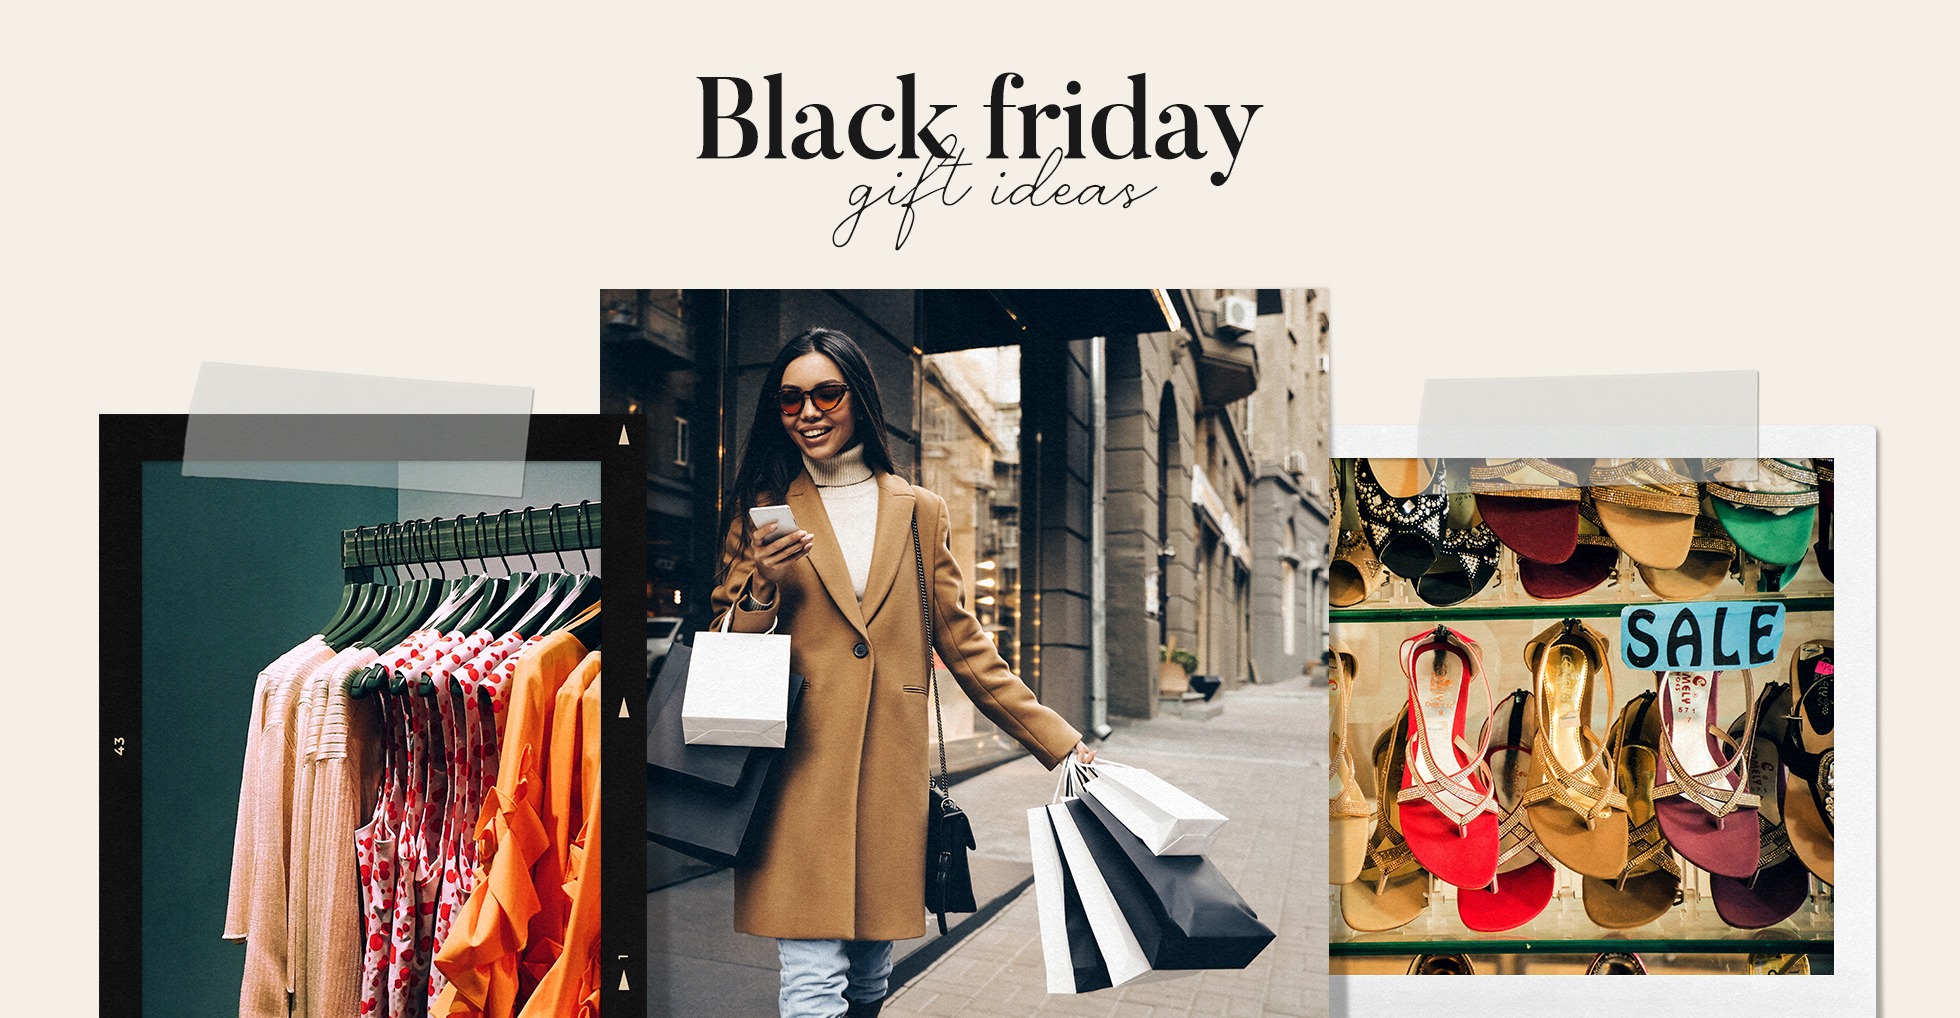 10 Black Friday Gift Ideas for Everyone On Your Shopping List